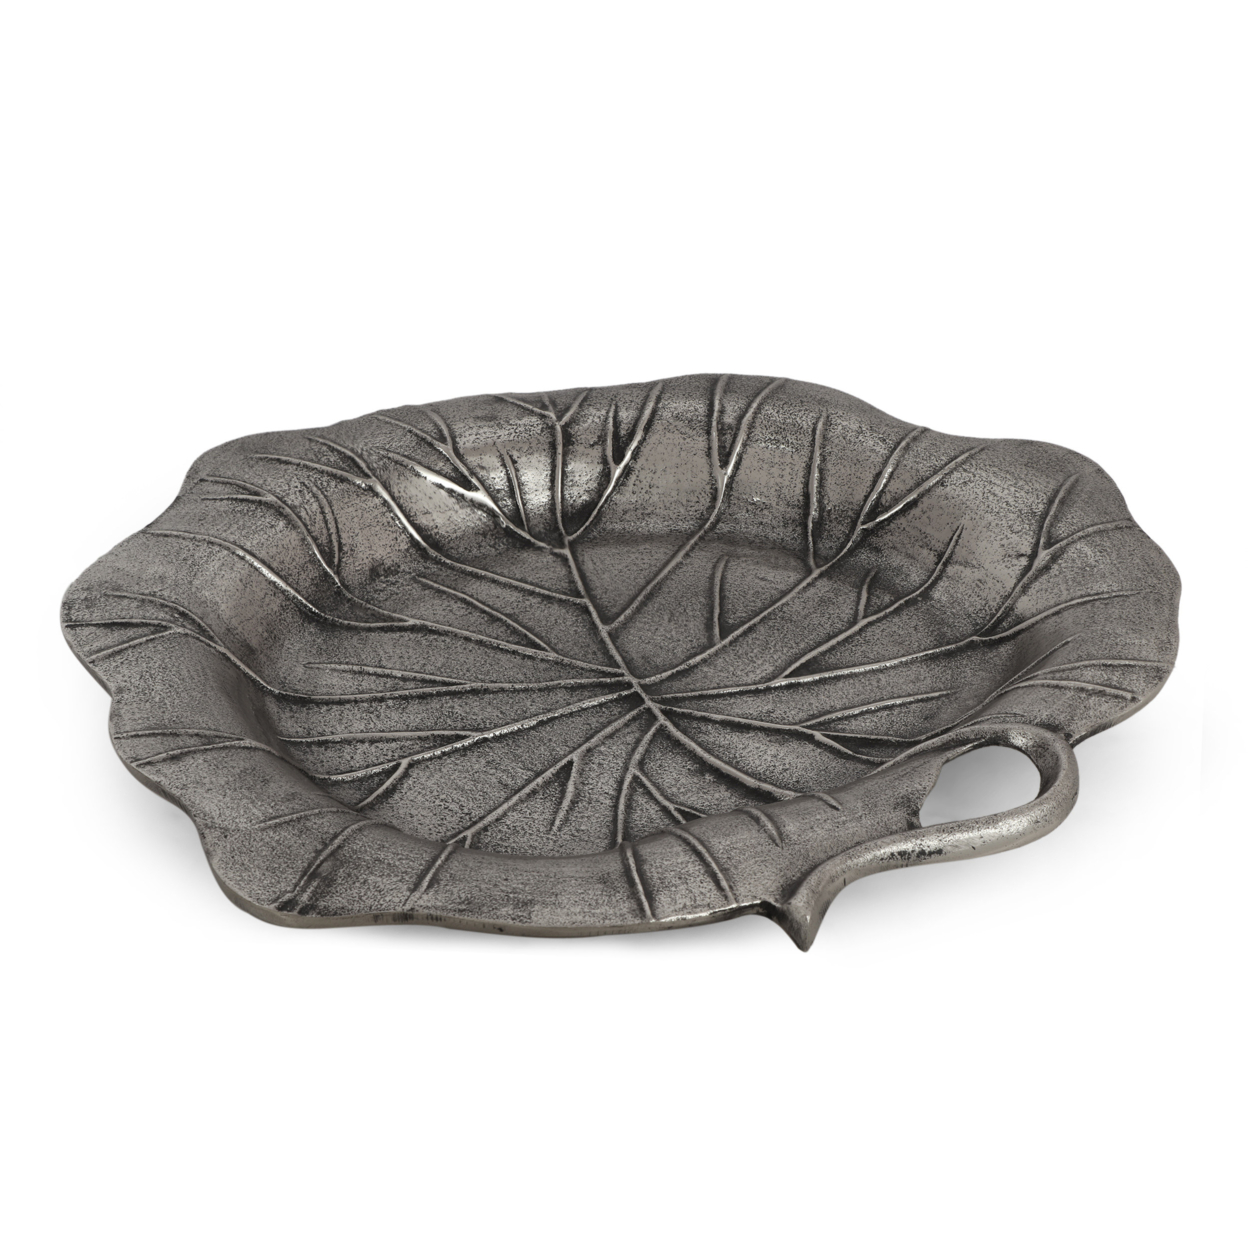 Lovejoy Handcrafted Aluminum Leaf Dish